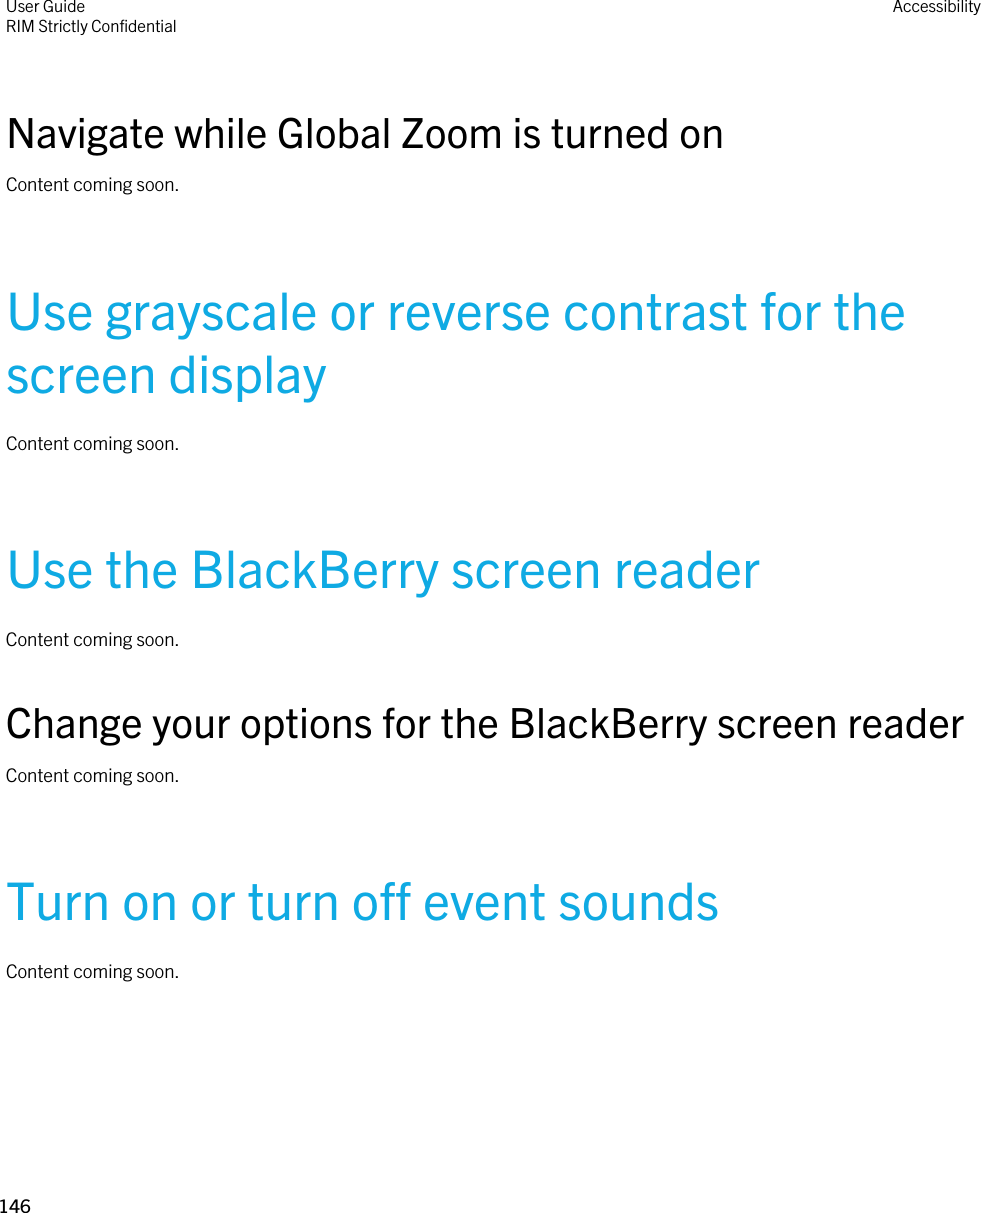 Navigate while Global Zoom is turned onContent coming soon.Use grayscale or reverse contrast for the screen displayContent coming soon.Use the BlackBerry screen readerContent coming soon.Change your options for the BlackBerry screen readerContent coming soon.Turn on or turn off event soundsContent coming soon.User GuideRIM Strictly ConfidentialAccessibility146 